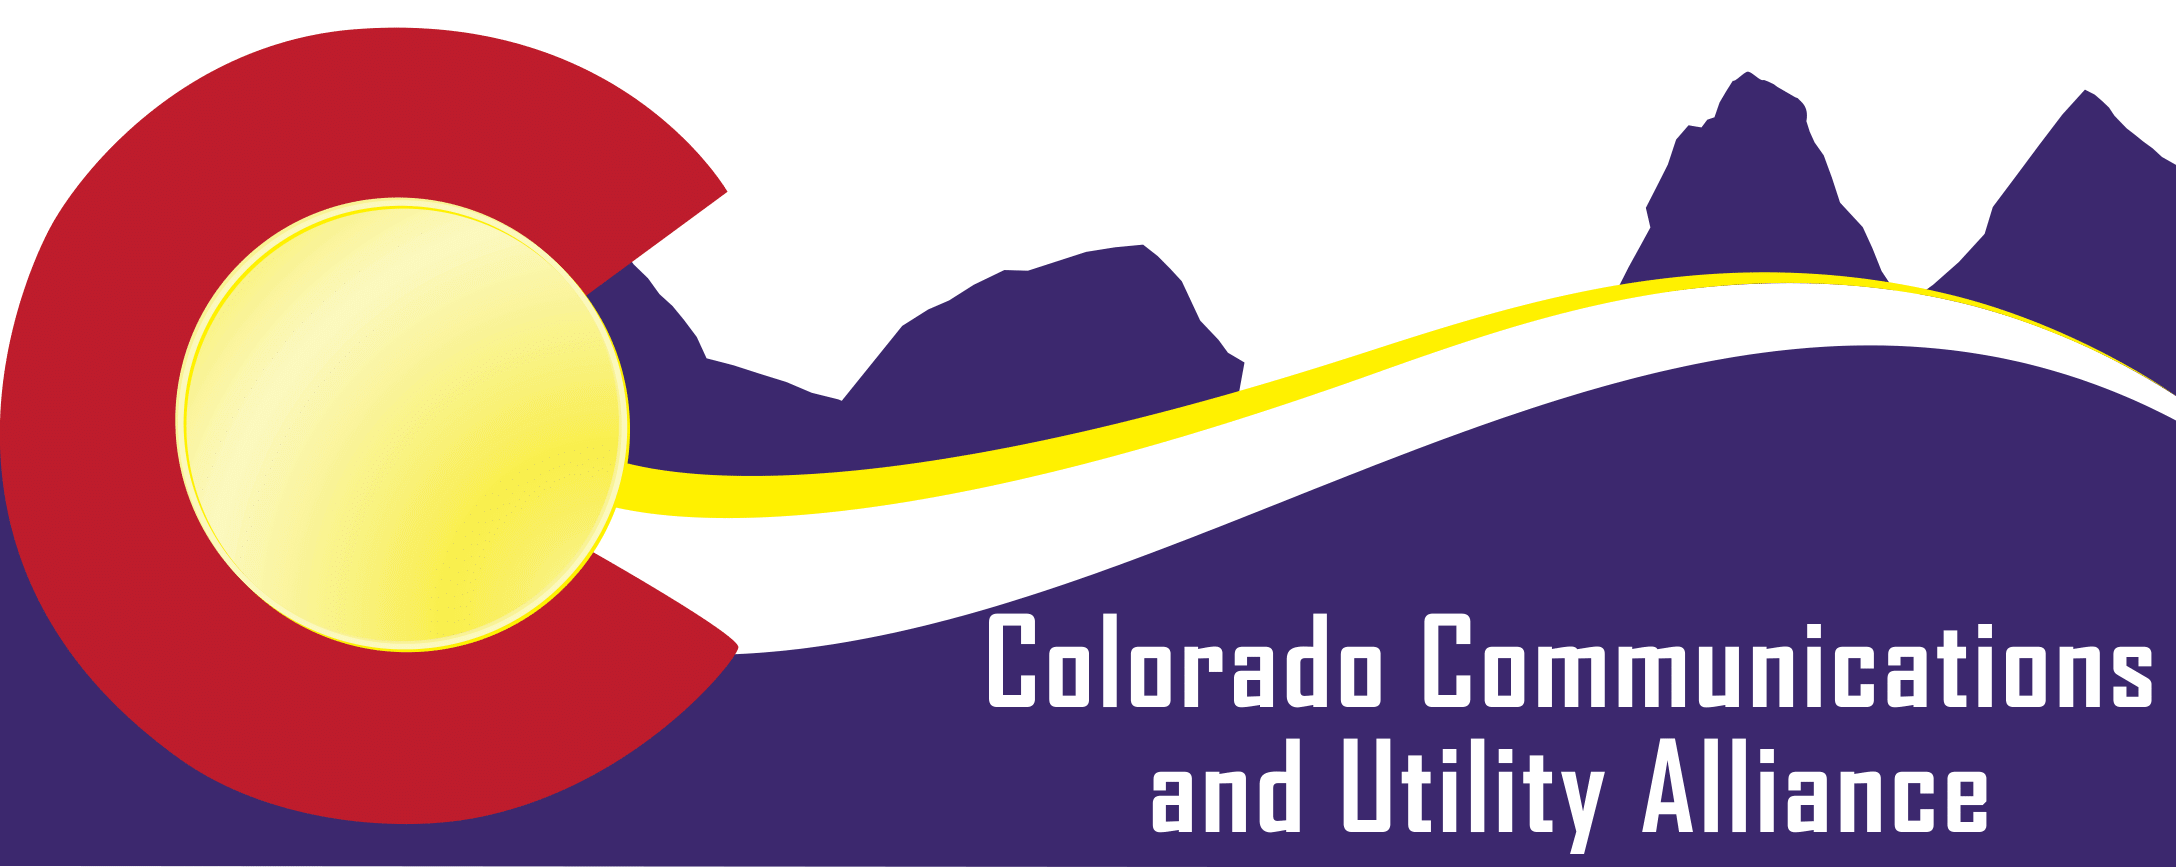 Colorado Communications and Utility Alliance Home